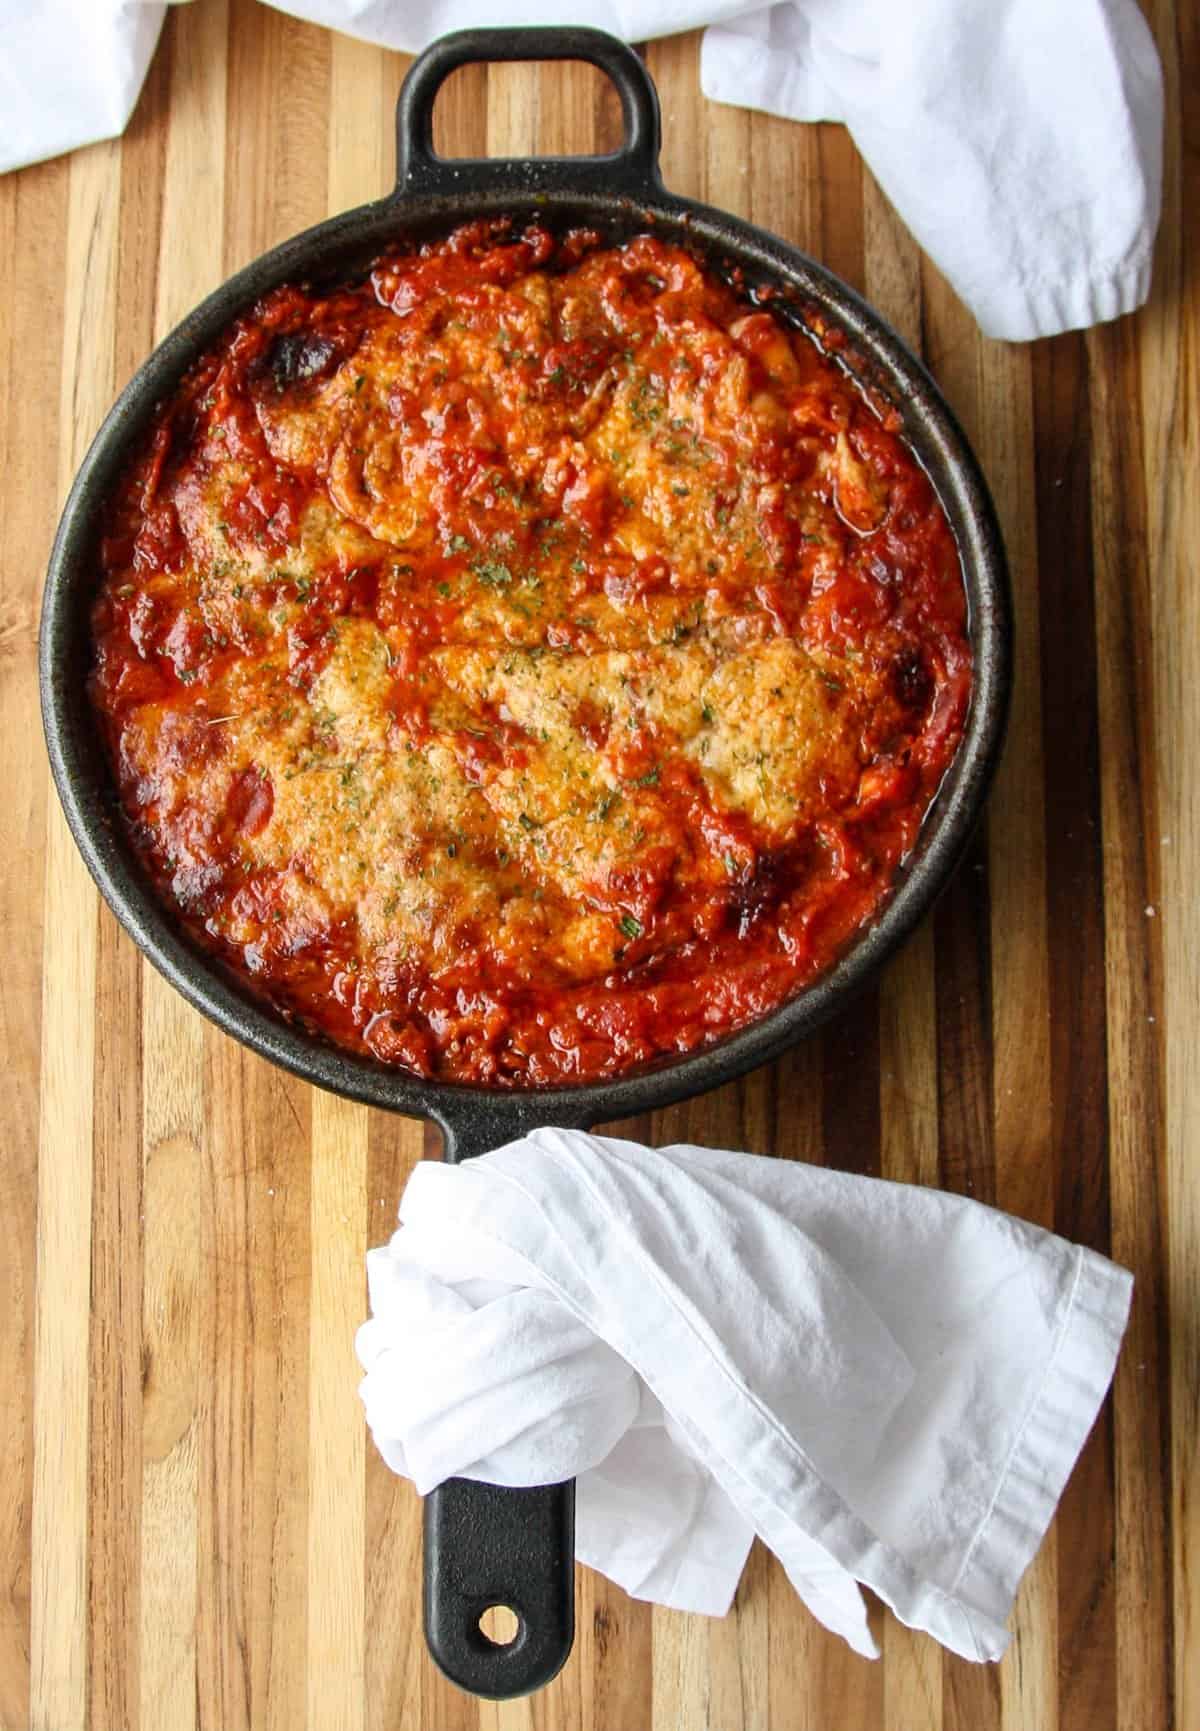 A pan of baked chicken covered in tomato sauce and cheese.